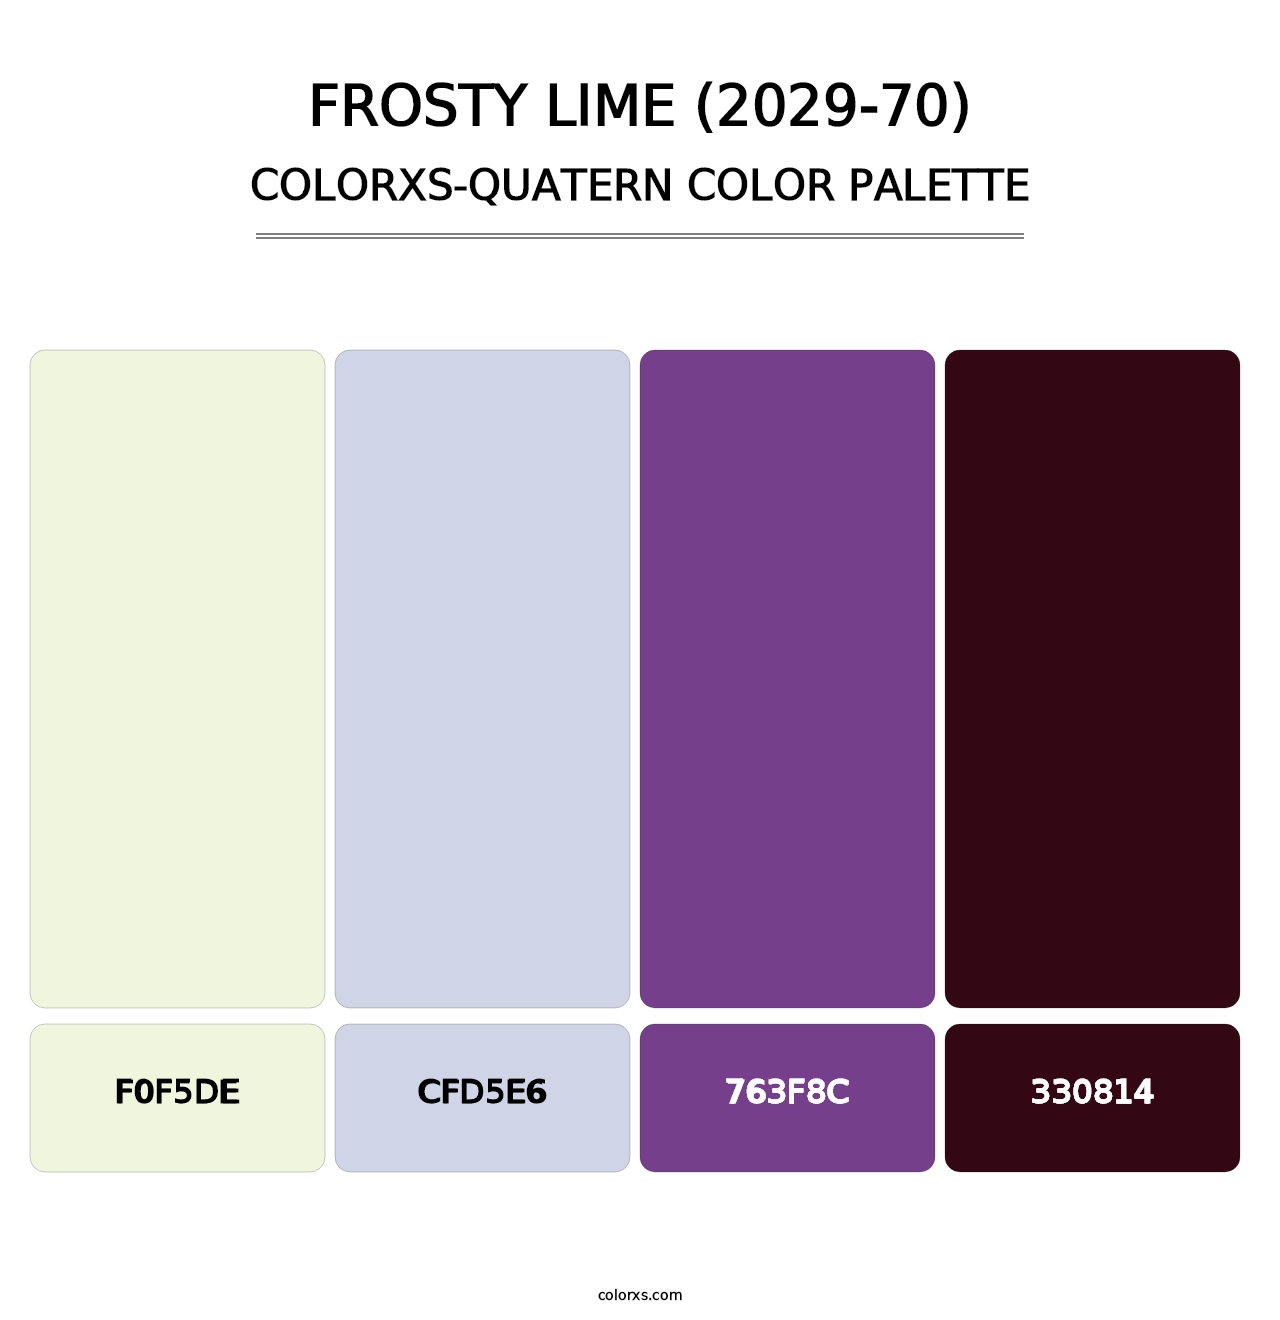 Frosty Lime (2029-70) - Colorxs Quatern Palette